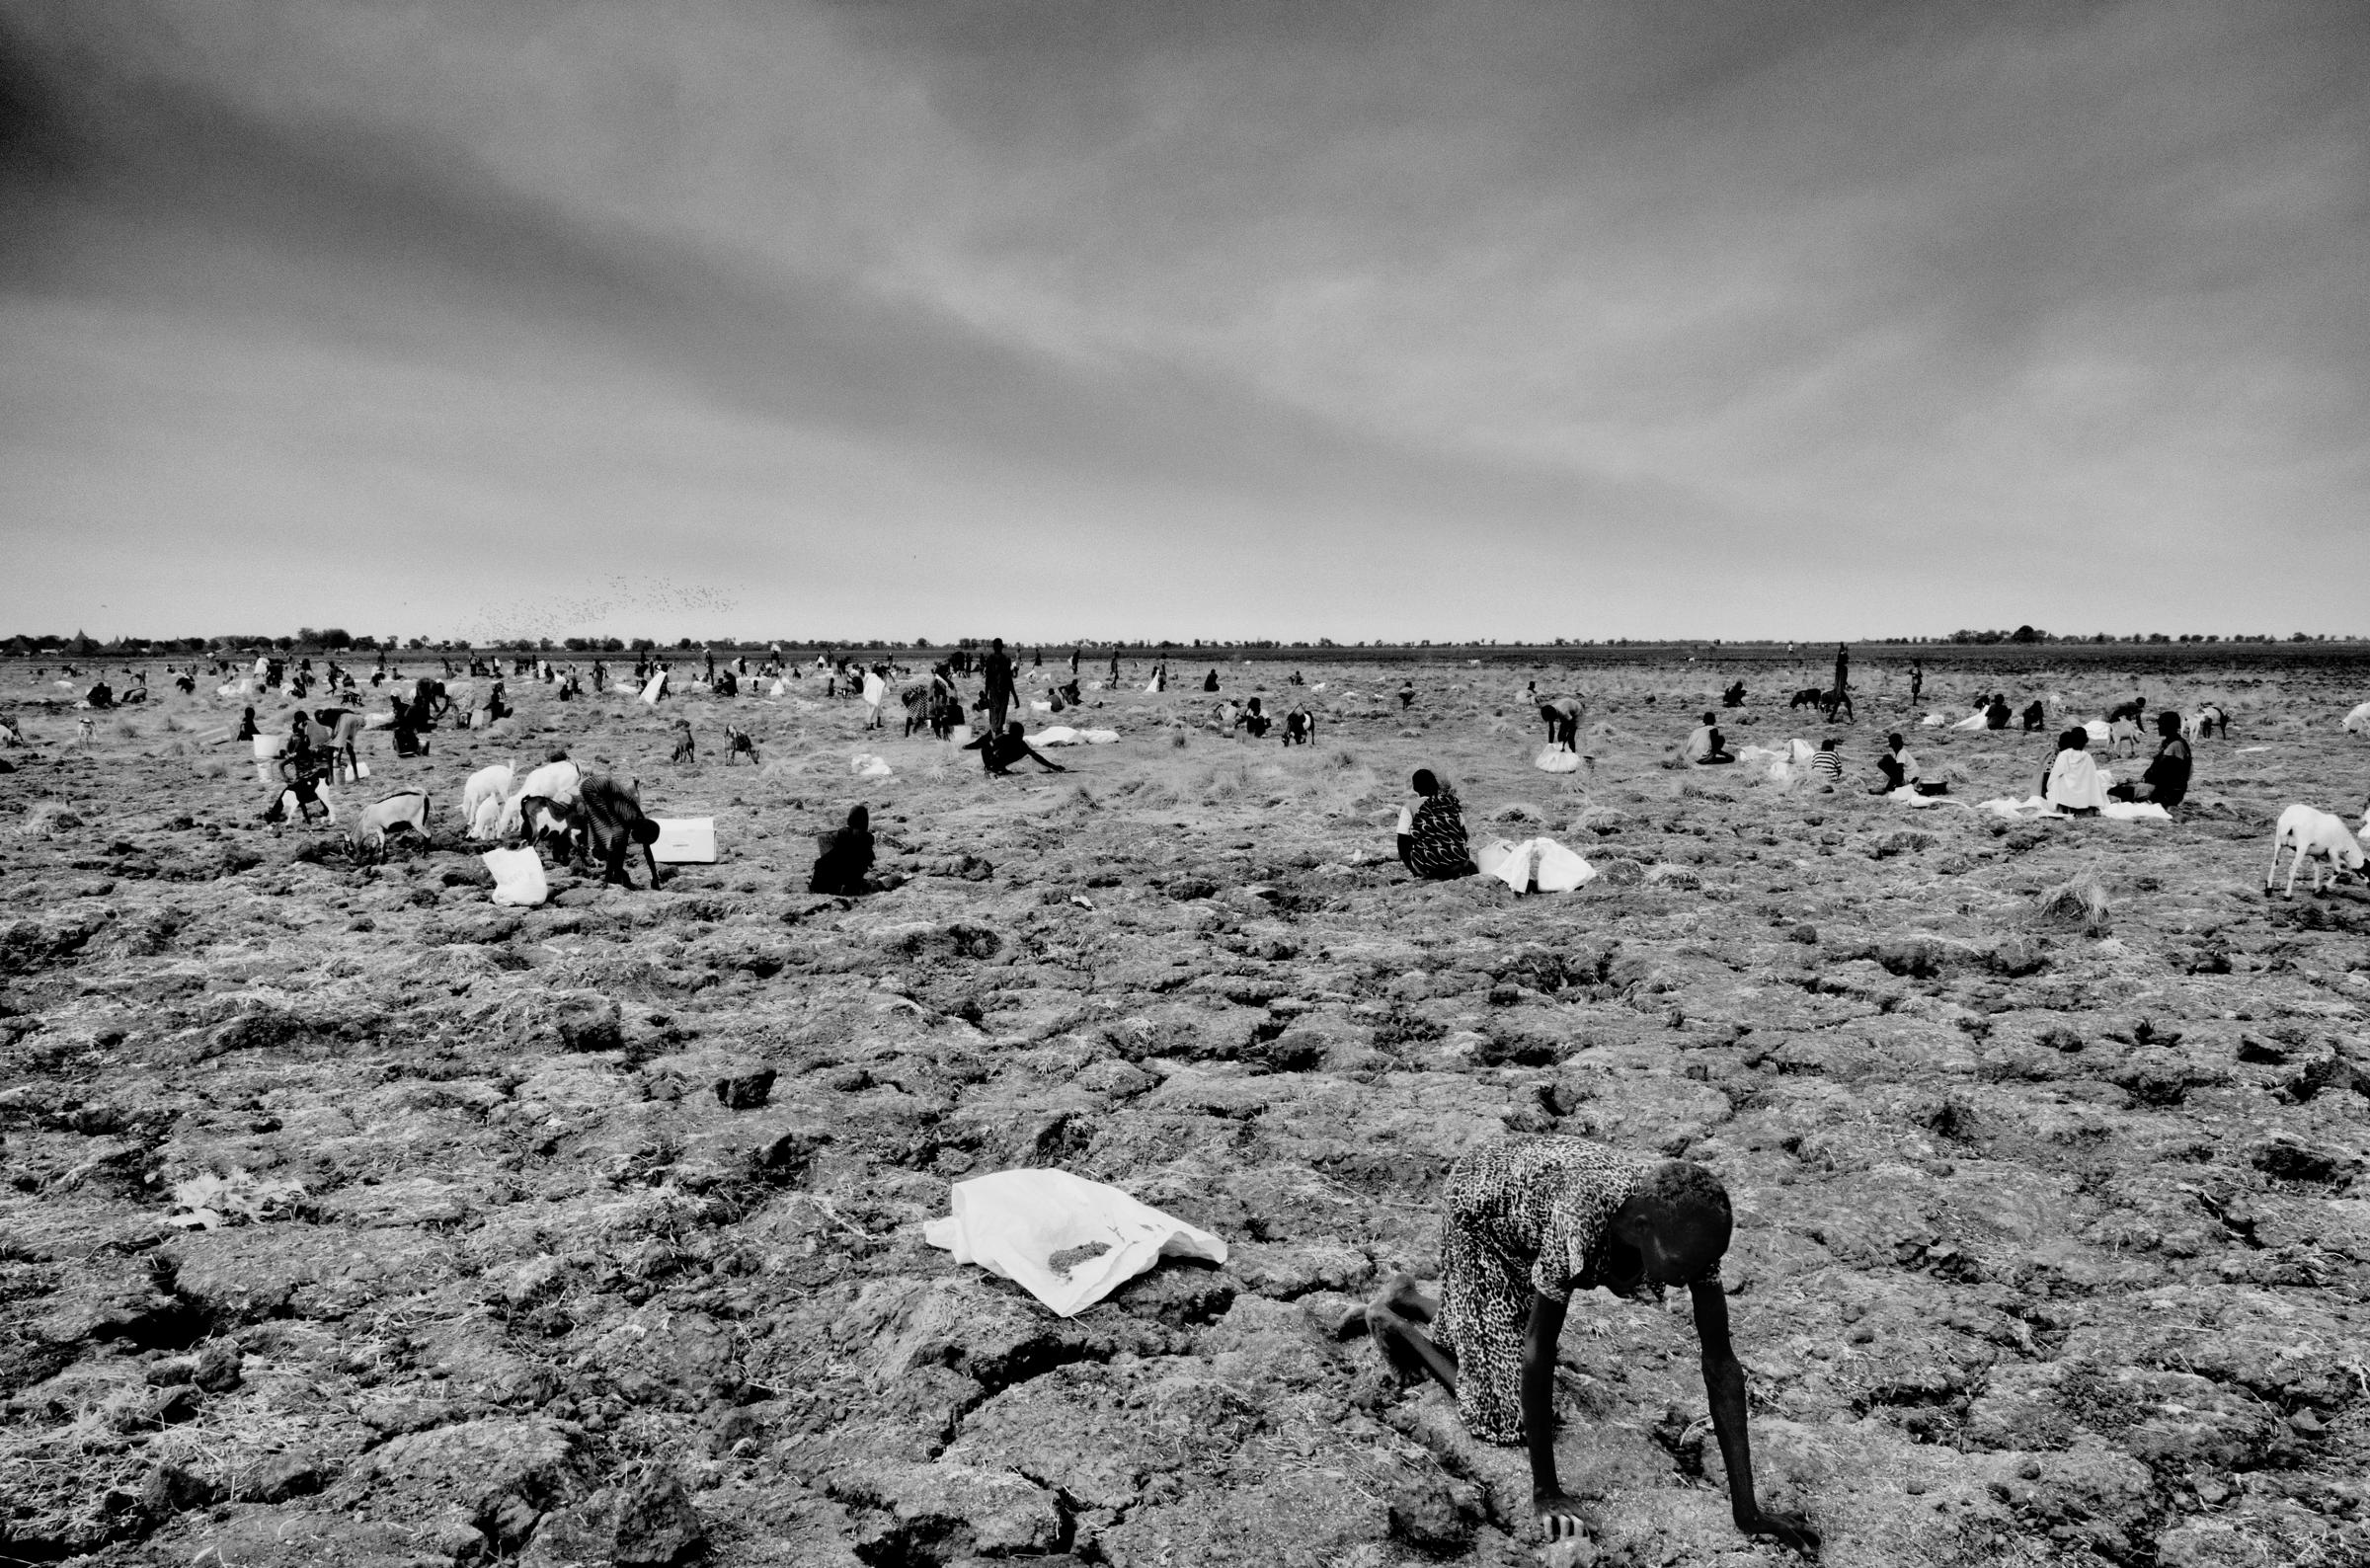 Community members search for spilled grain on the site of a World Food Program airdrop in Ganyiel, South Sudan on March 10, 2016. Ganyiel is a small community that has become a safe haven and a center for relief distribution for over 90,000 people in the conflict-torn nation of South Sudan.